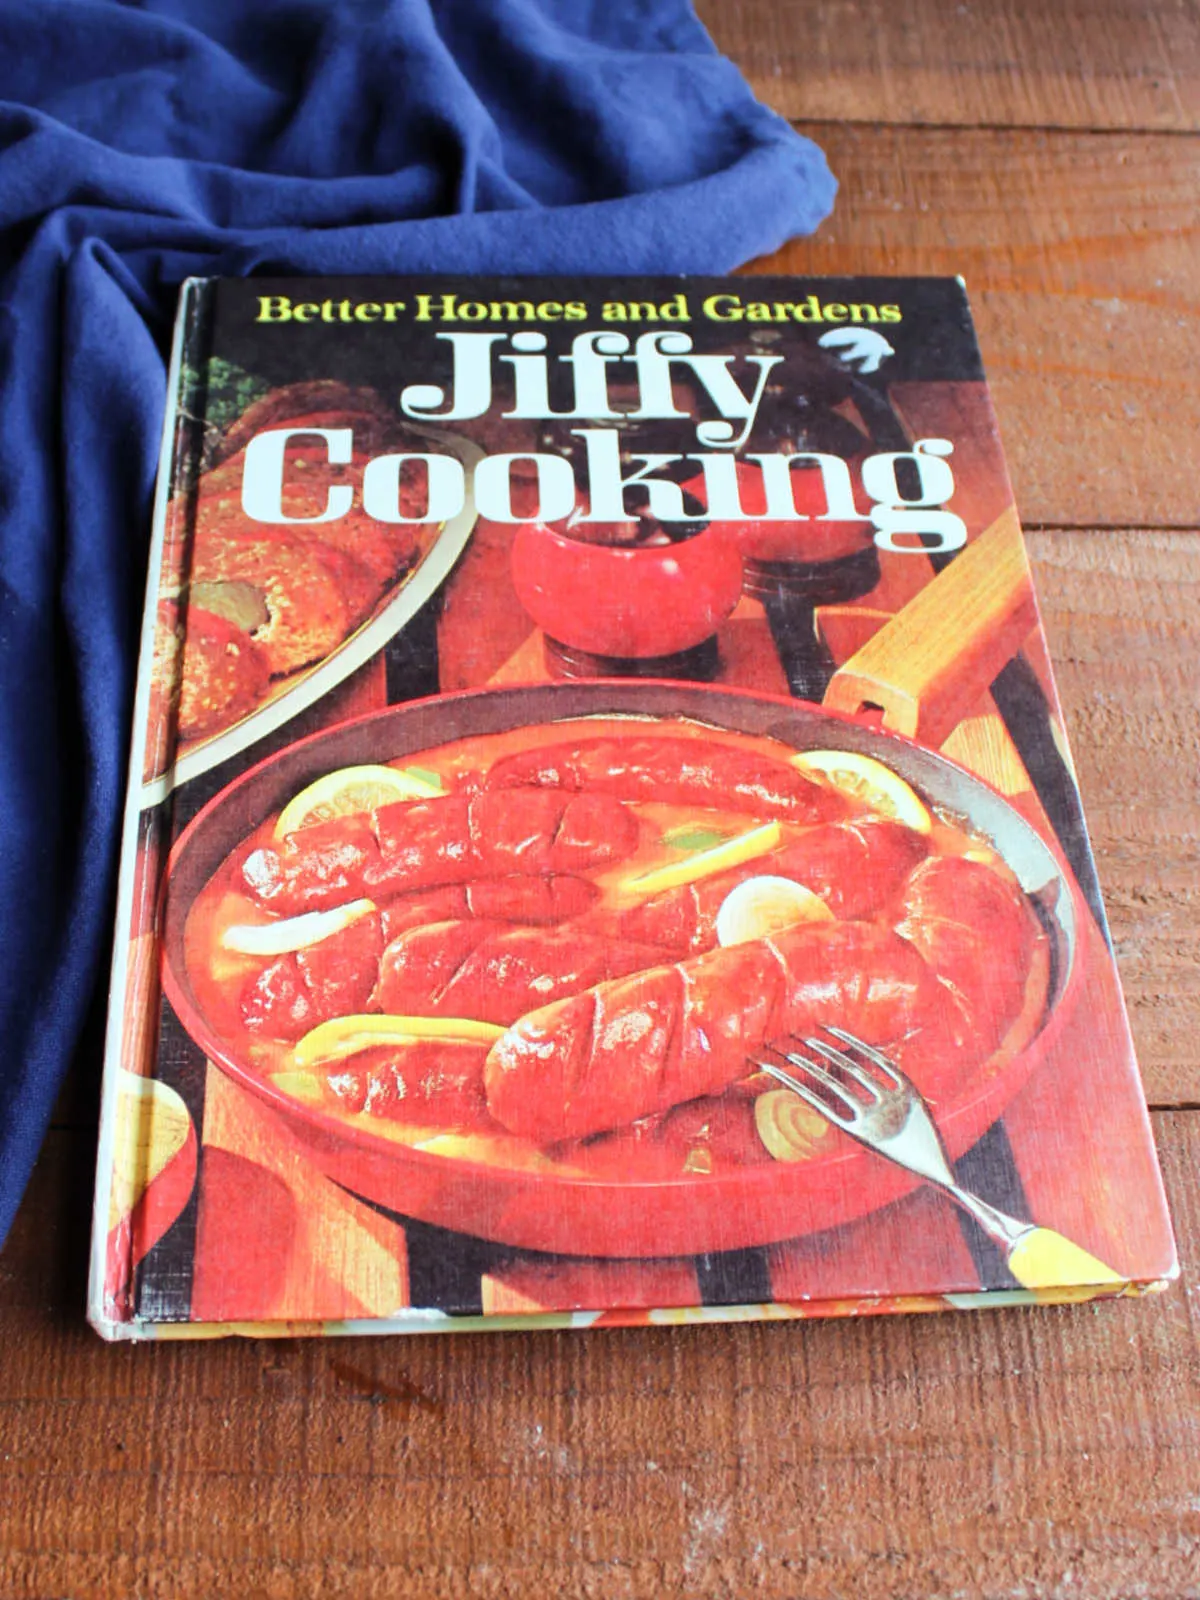 Picture of vintage Jiffy Cooking cookbook showing cover of the old cookbook.